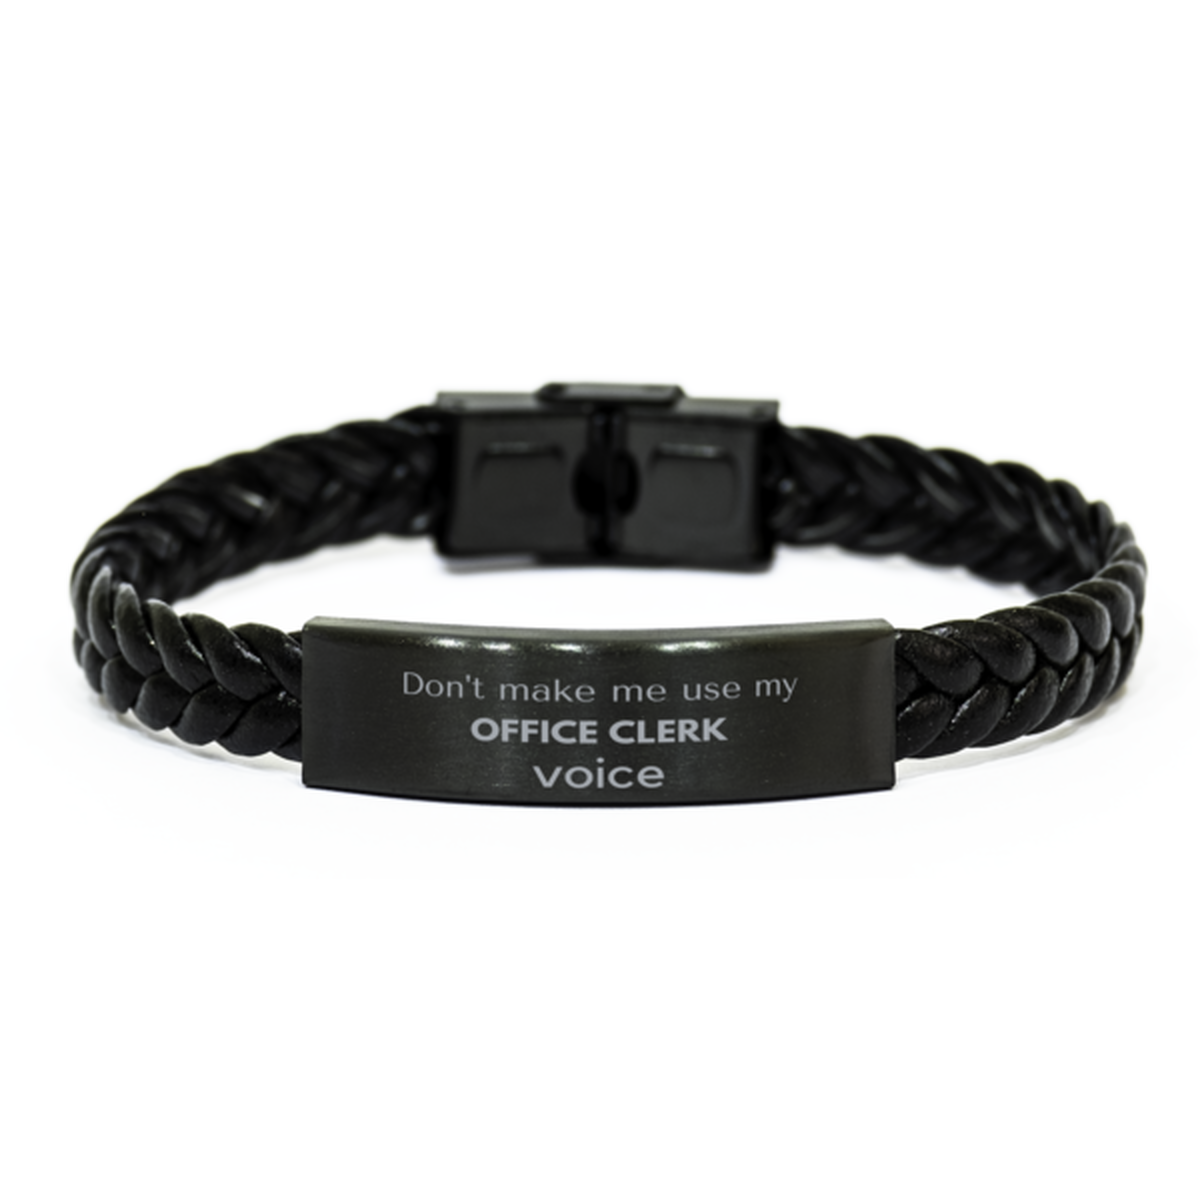 Don't make me use my Office Clerk voice, Sarcasm Office Clerk Gifts, Christmas Office Clerk Braided Leather Bracelet Birthday Unique Gifts For Office Clerk Coworkers, Men, Women, Colleague, Friends